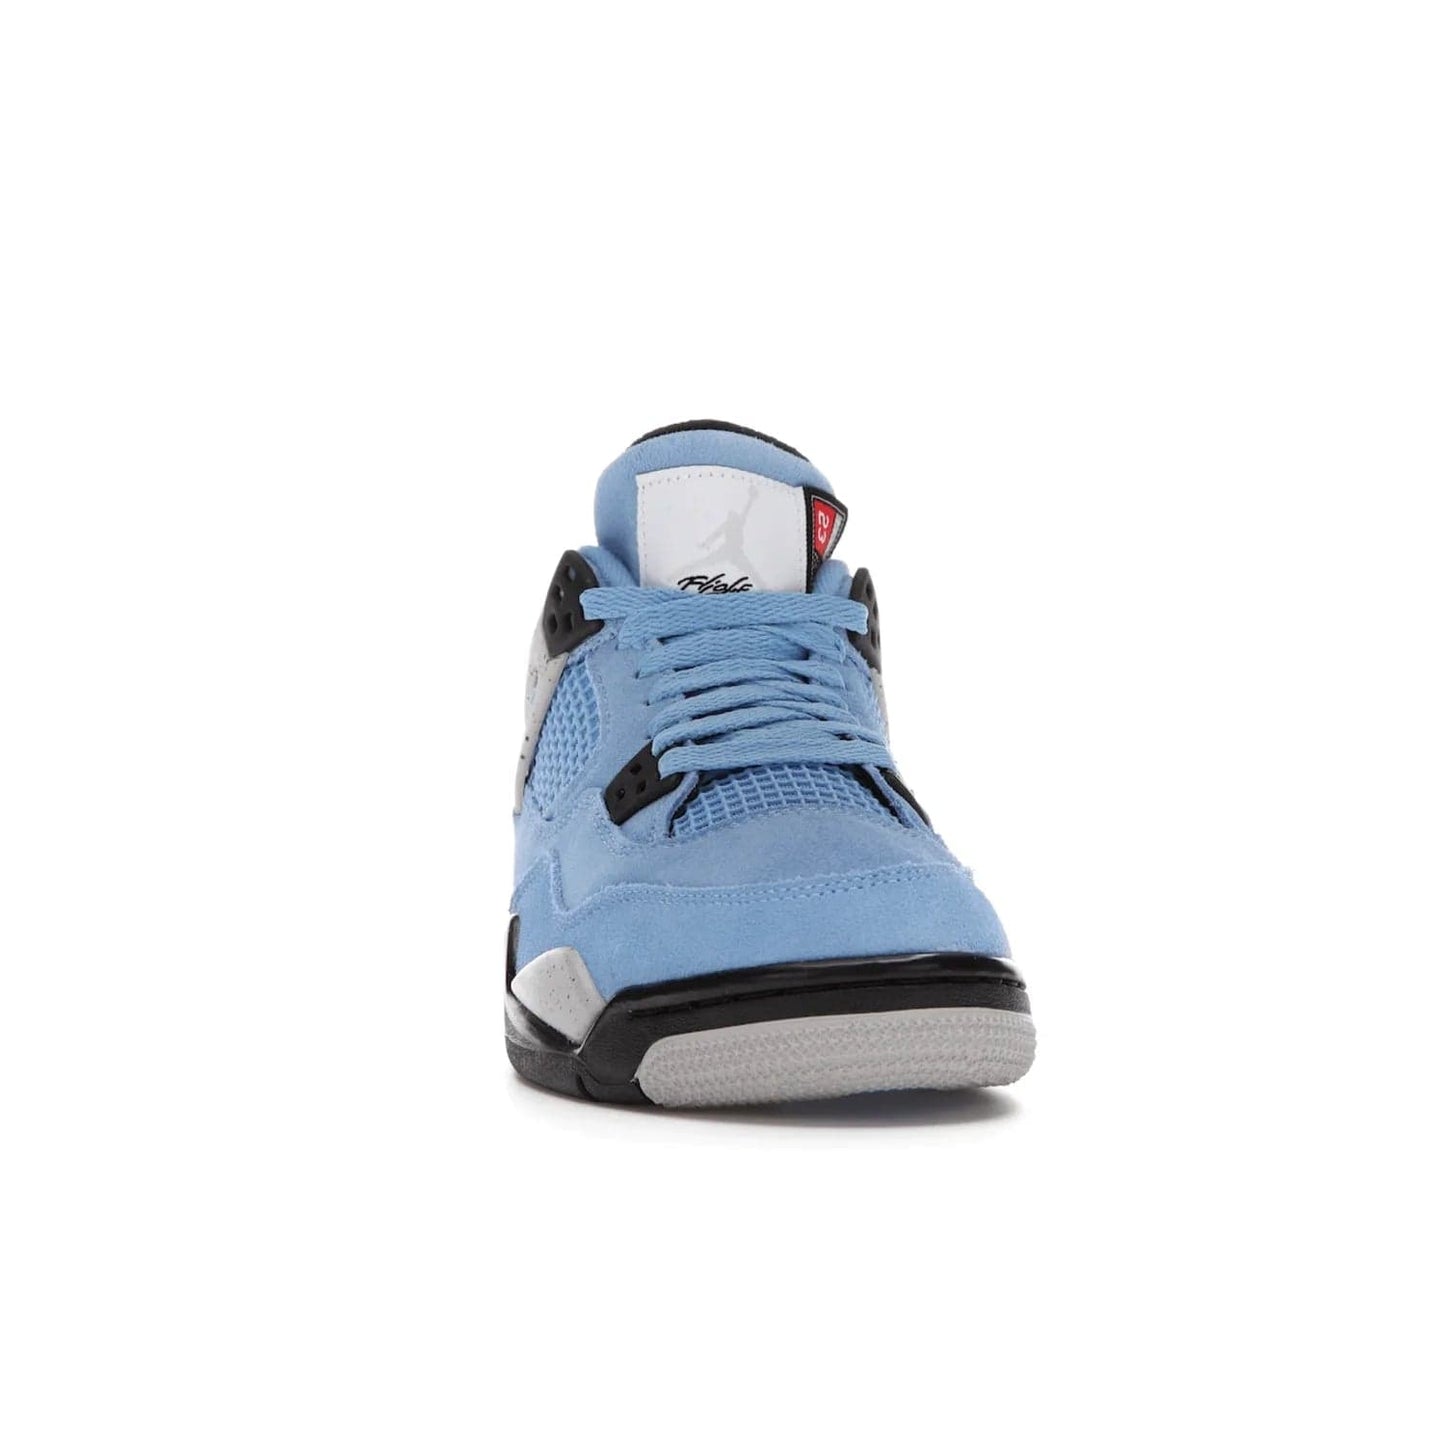 Jordan 4 Retro University Blue (GS) - Image 9 - Only at www.BallersClubKickz.com - Air Jordan 4 Retro University Blue GS: Classic silhouette and vibrant colors. Featuring a suede upper and Jumpman icon, this grade school-size shoe is perfect for collections and retails at $150.